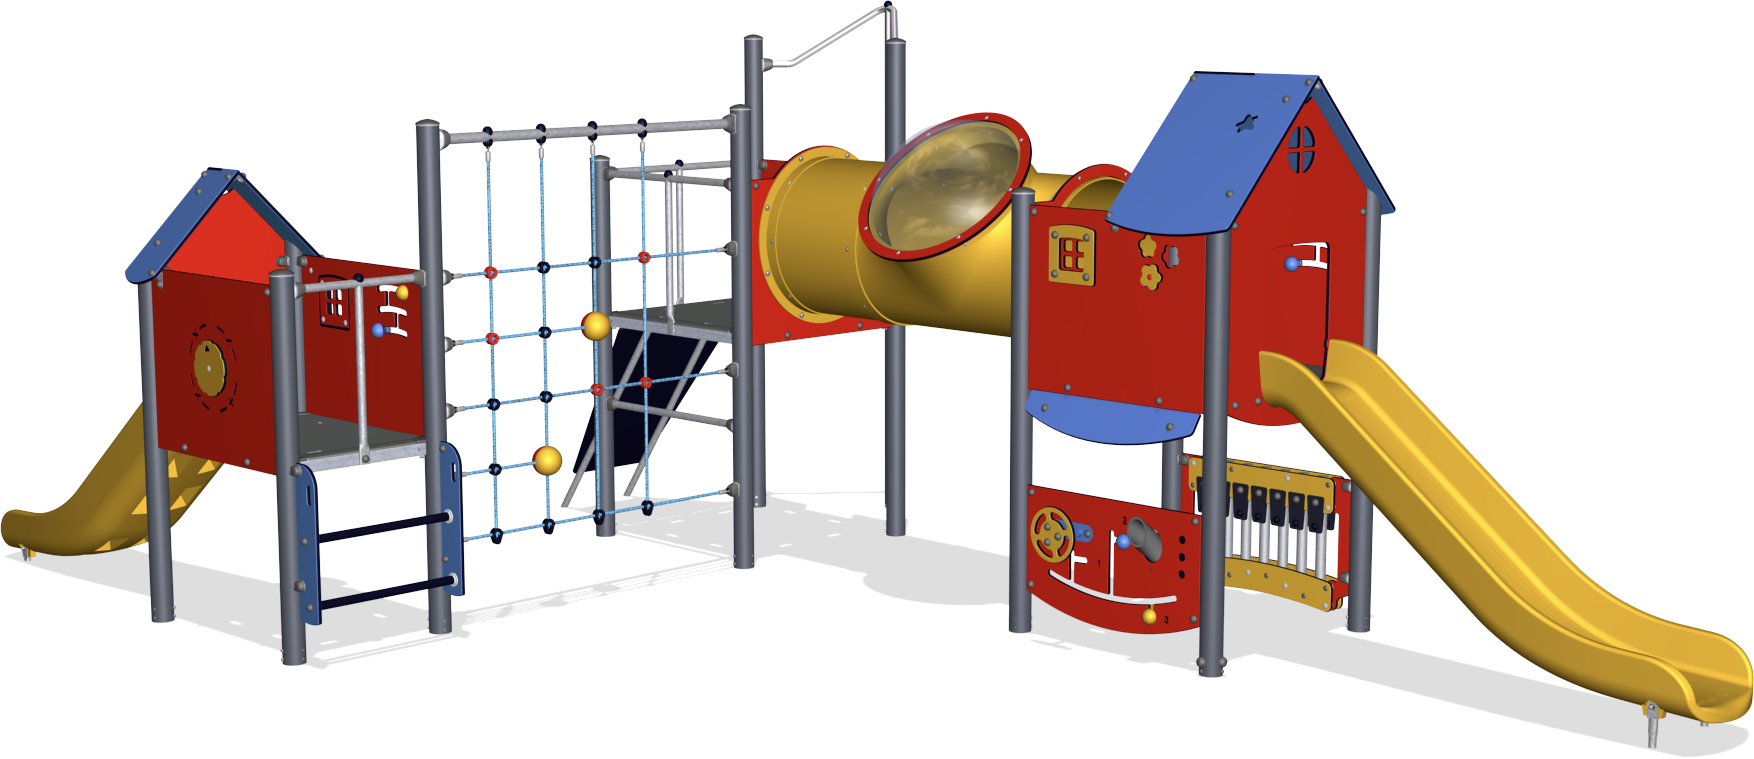 A Playground Equipment With A Tunnel